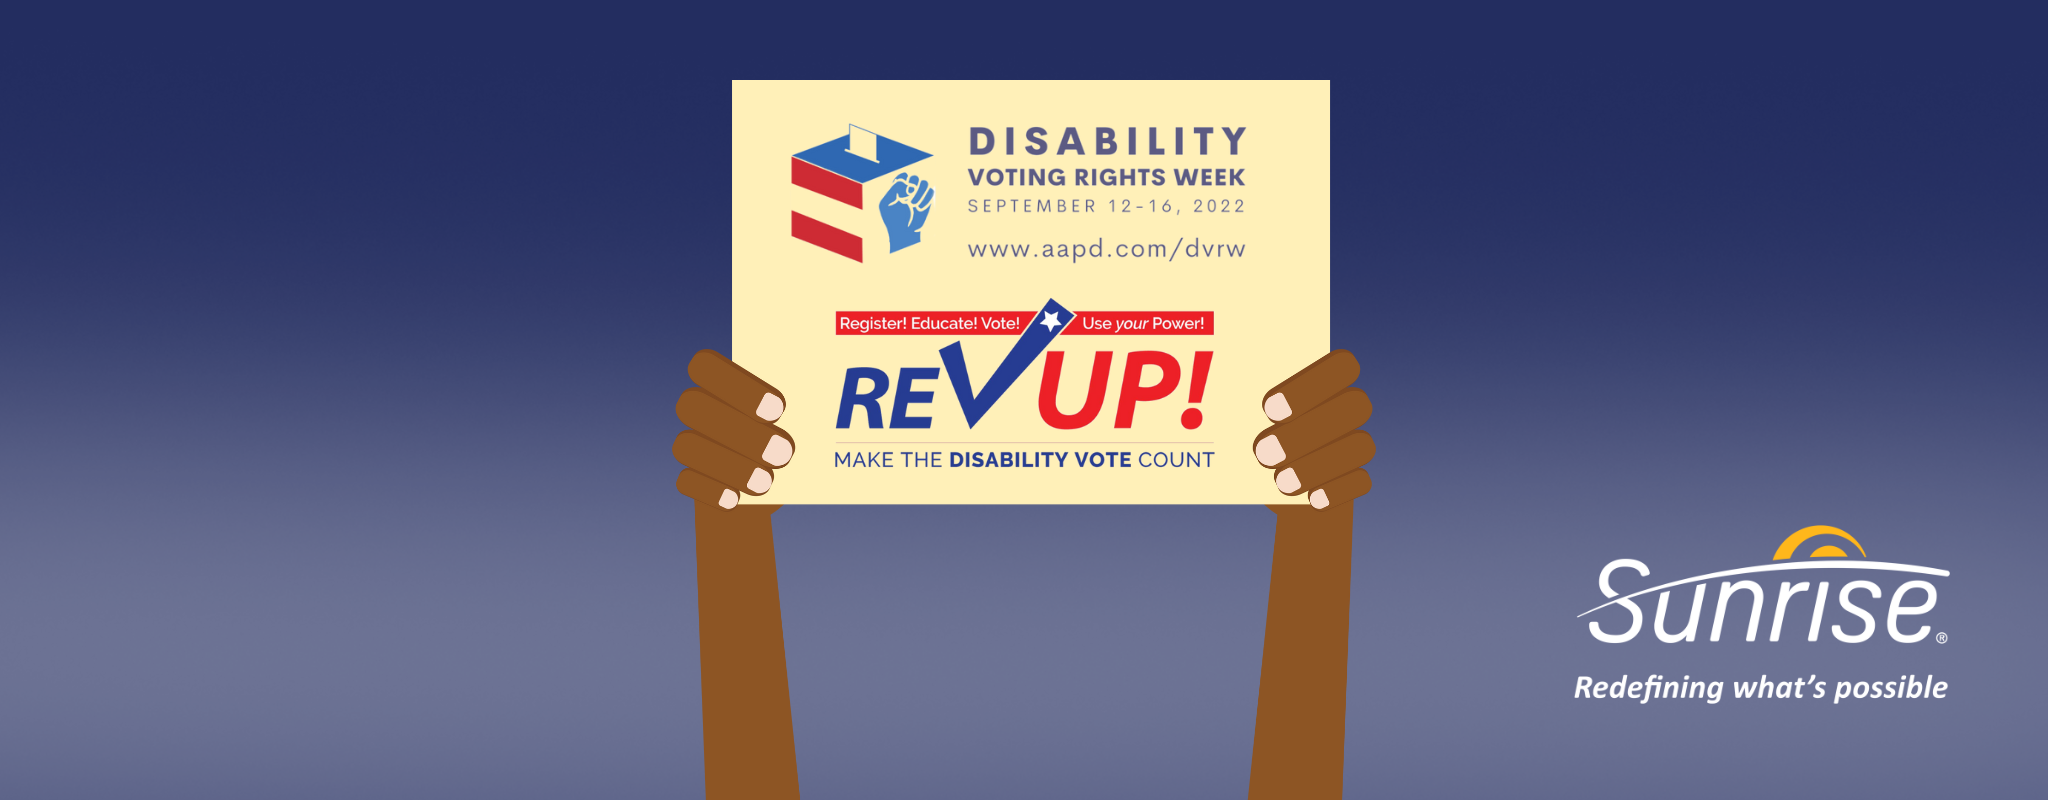 Disability Voting Rights Week 2022